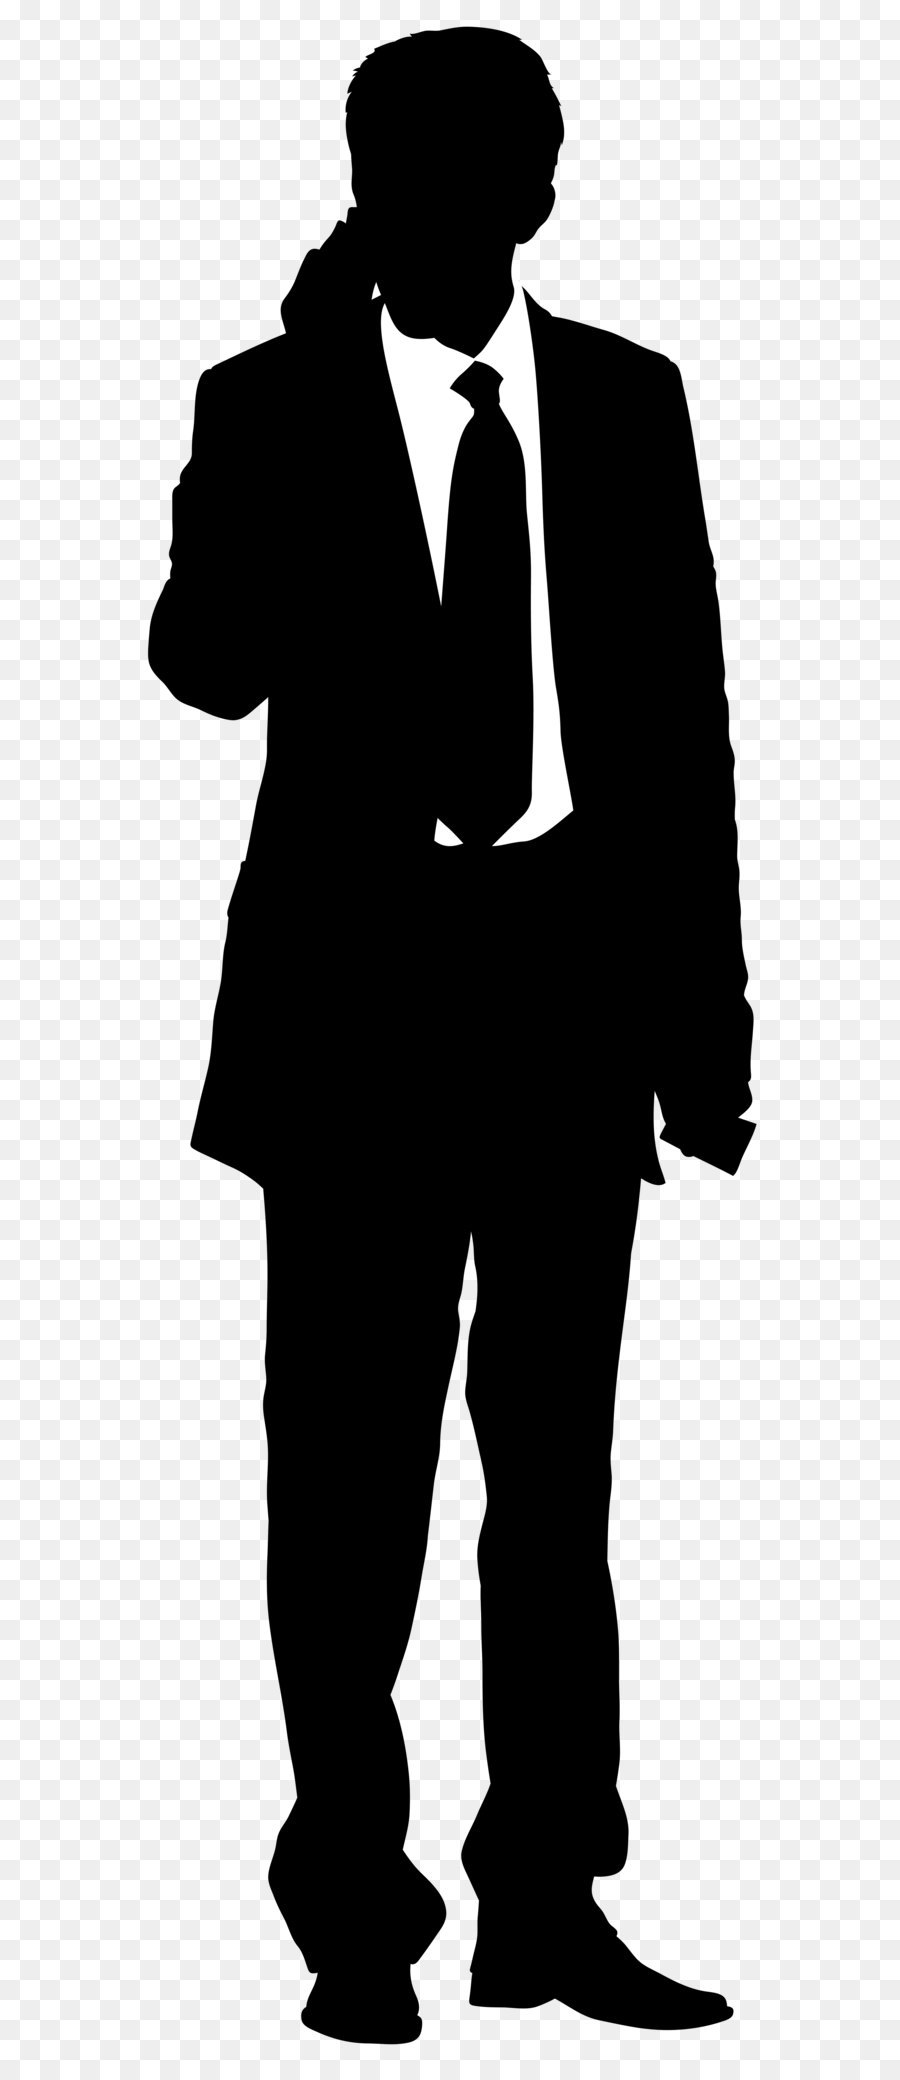 Scalable Vector Graphics Clip art - Businessman Silhouette PNG Clip Art Image png download - 2511*8000 - Free Transparent Silhouette png Download.